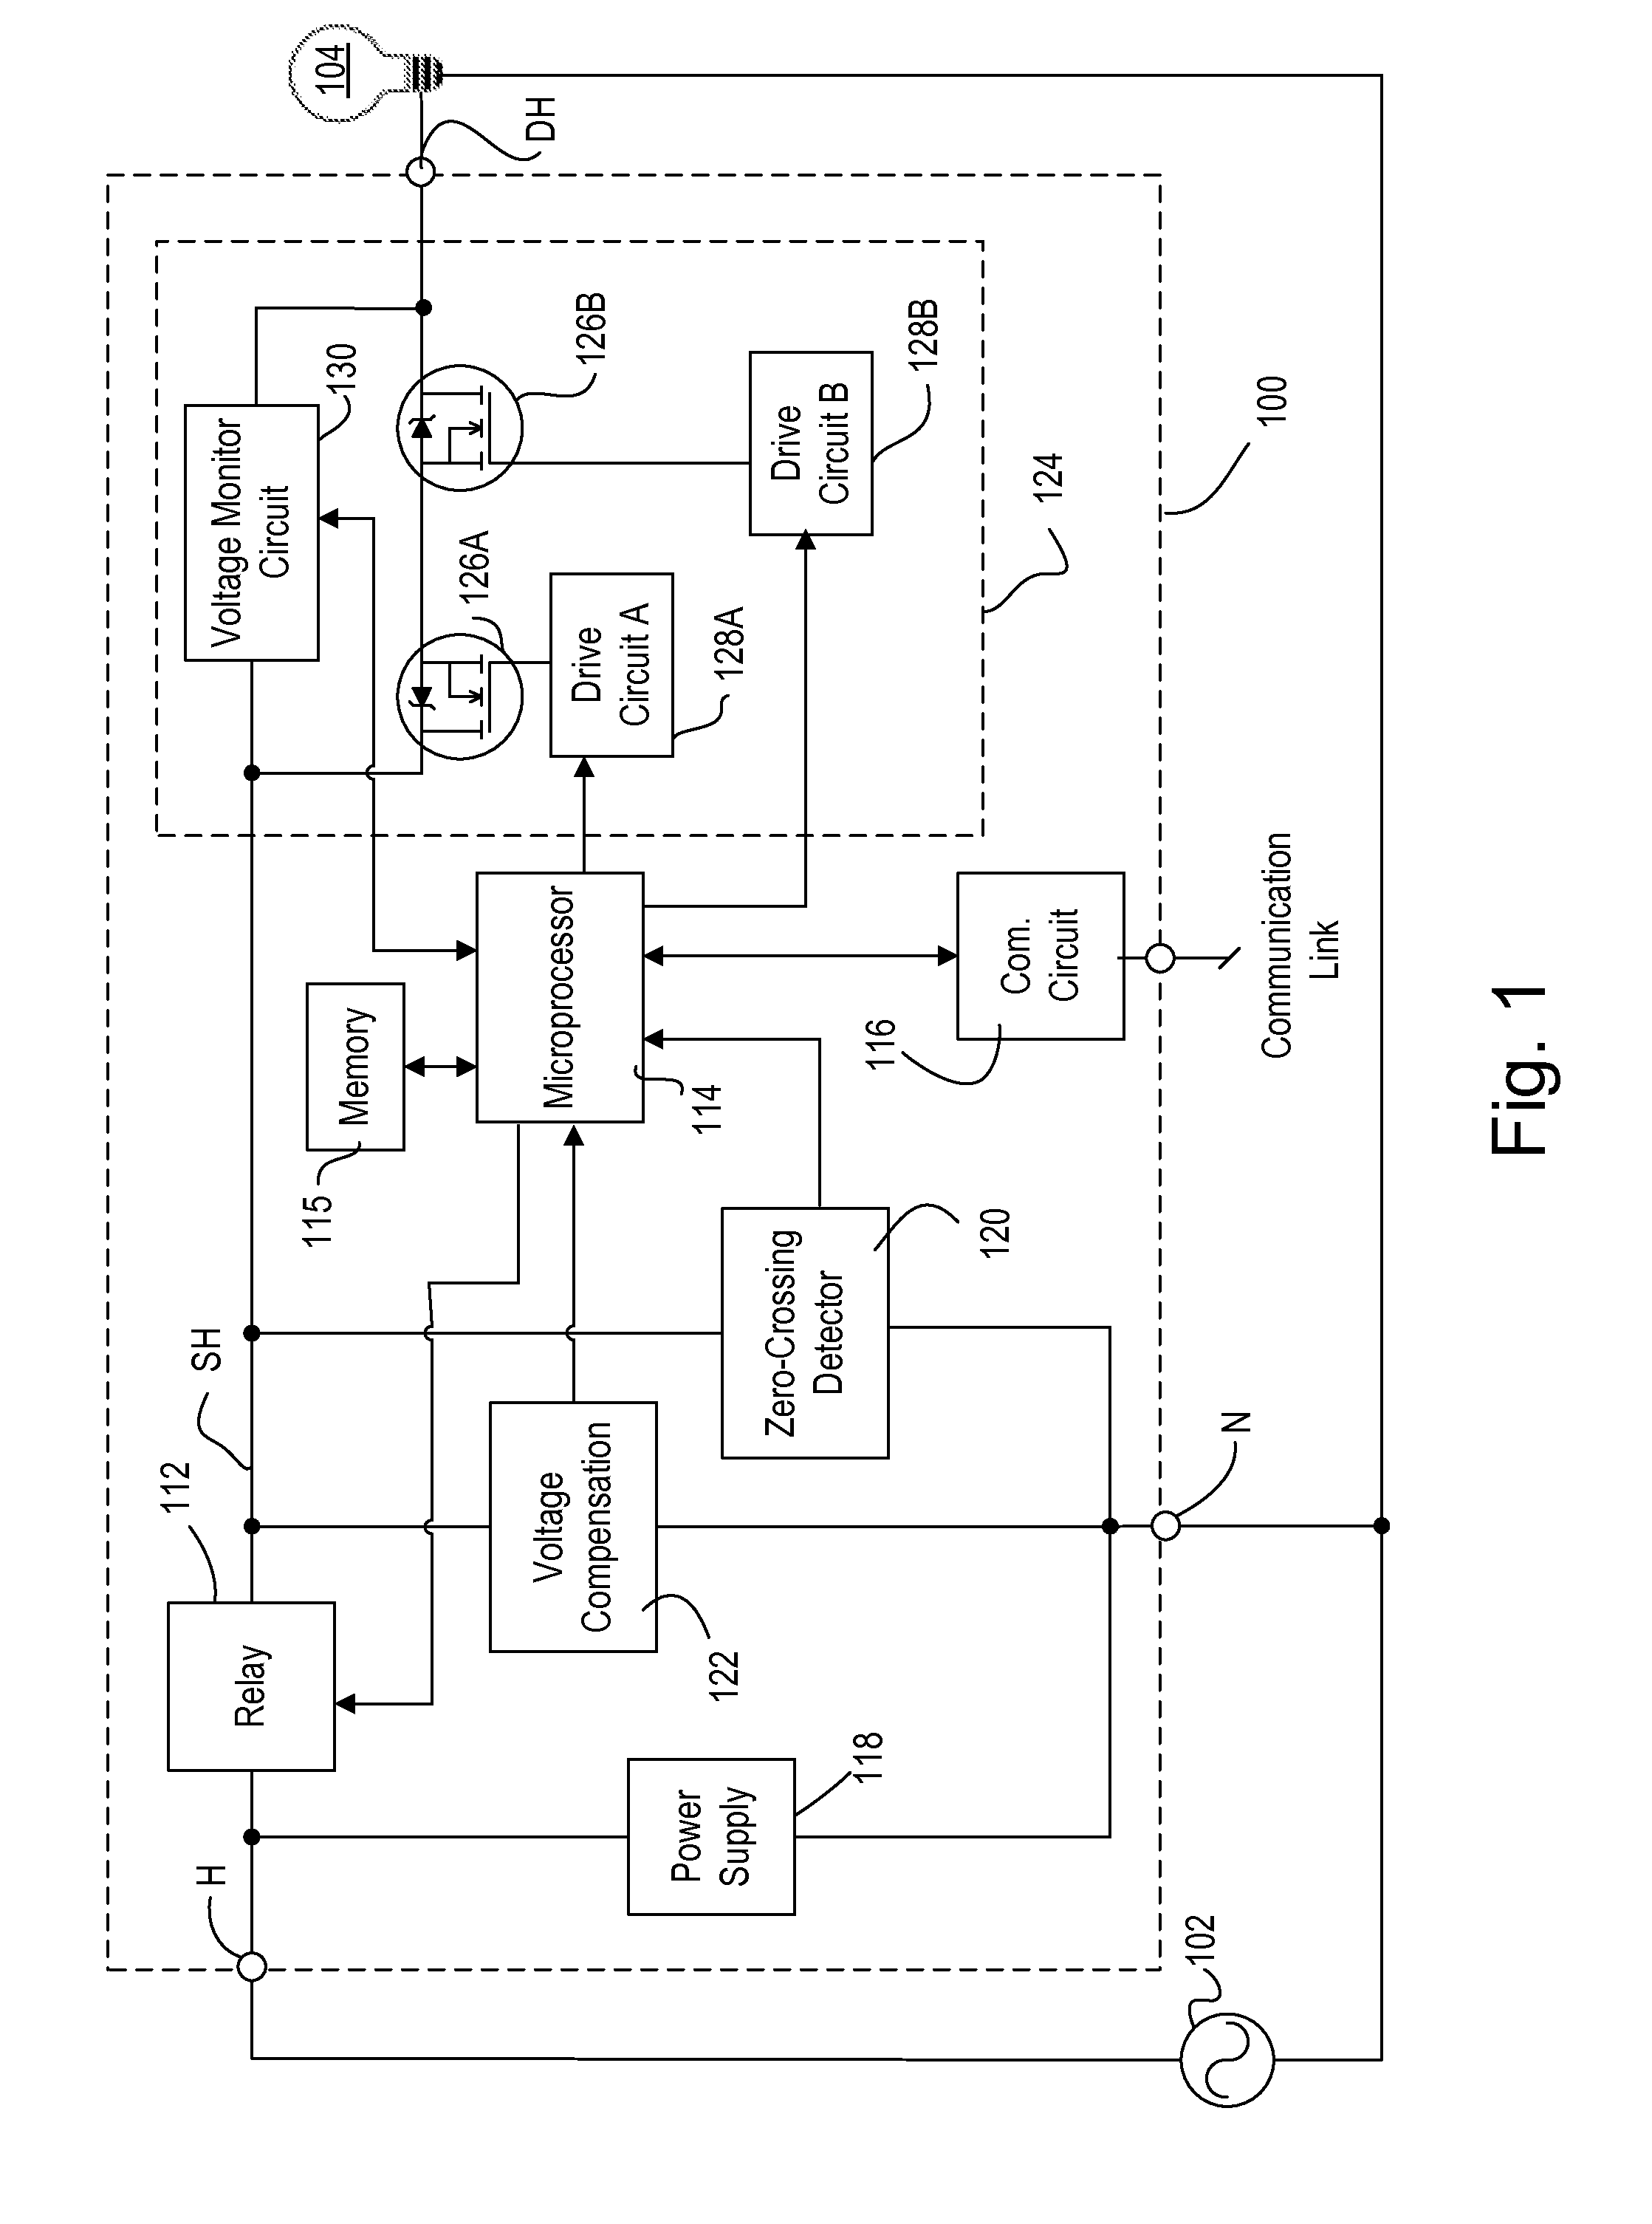 Method of Detecting a Fault Condition of a Load Control Device